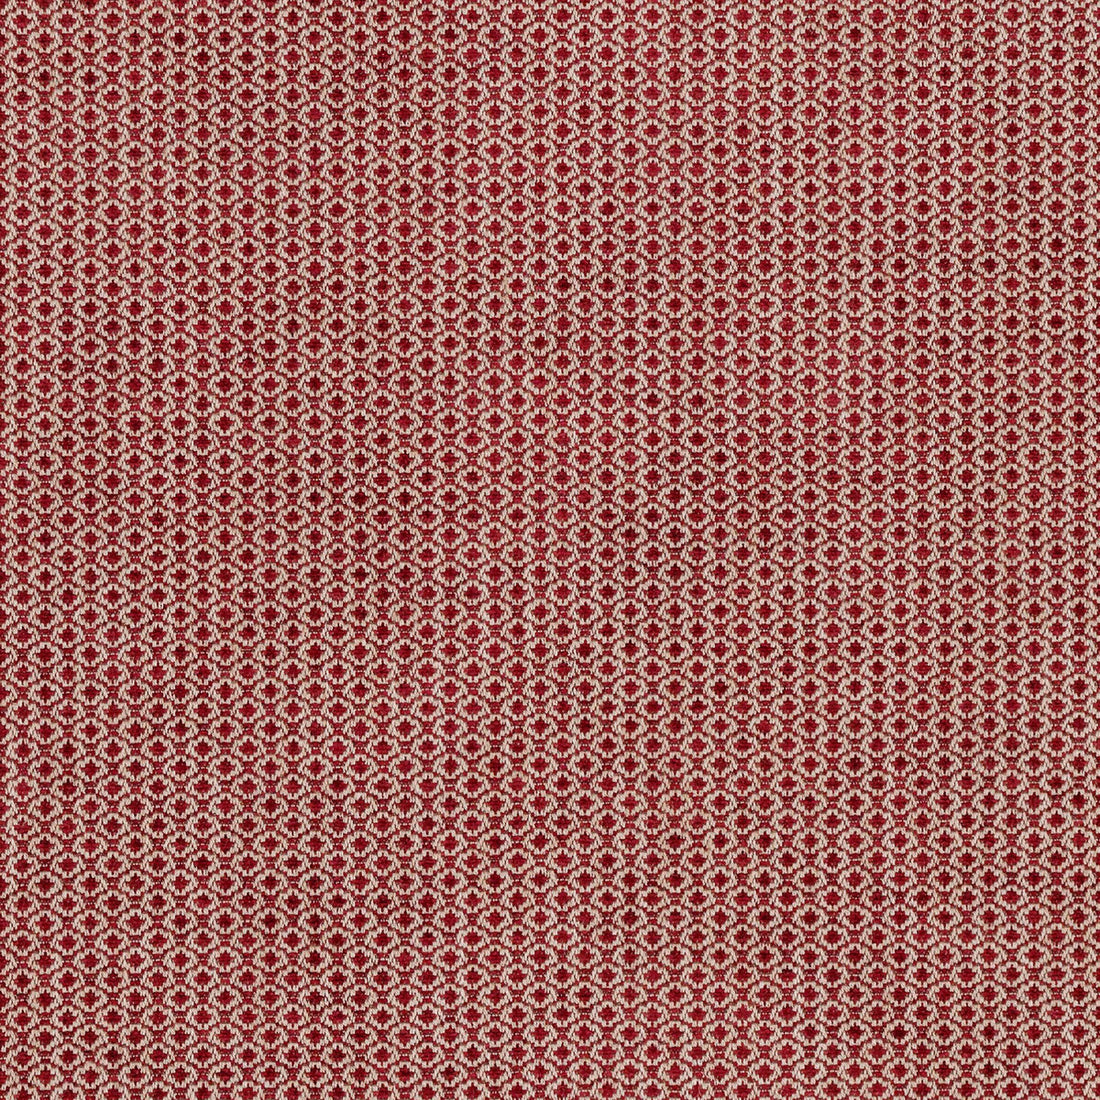 Cosgrove fabric in ruby color - pattern BFC-3672.9.0 - by Lee Jofa in the Blithfield collection